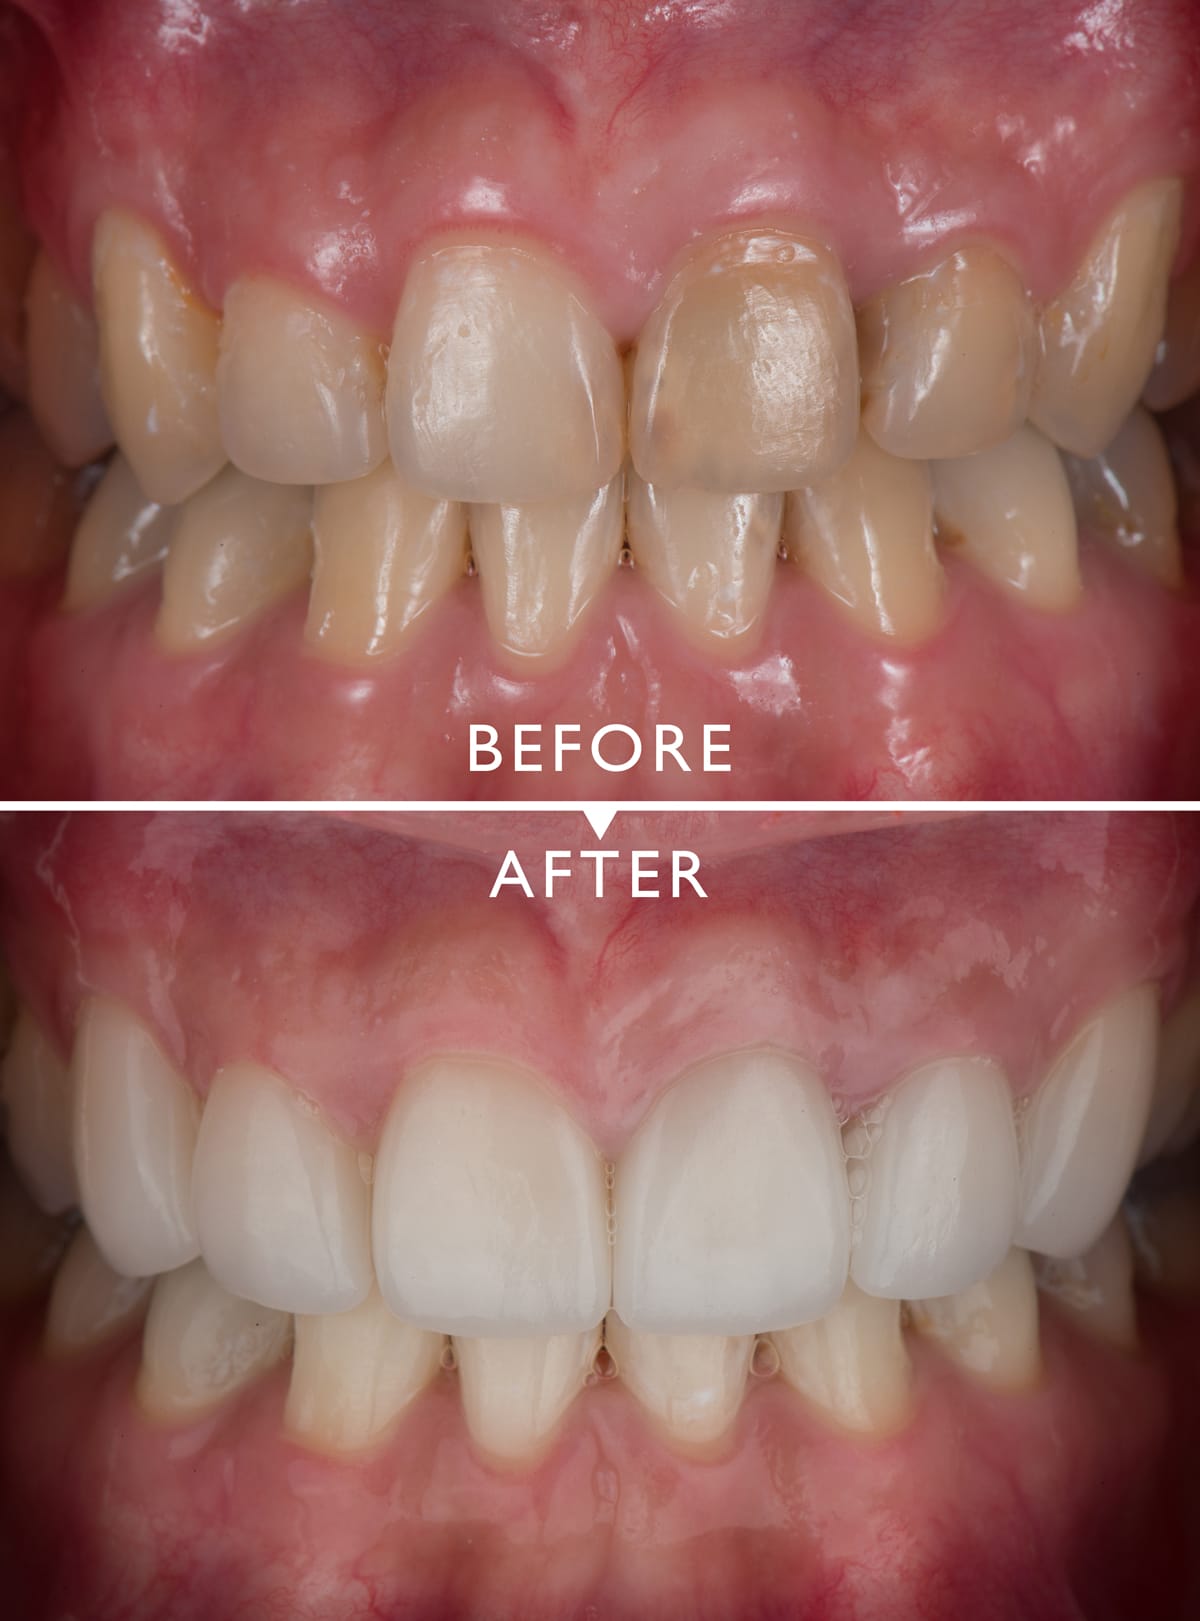 What Are The Differences Between Composite Resin Bonding & Veneers?